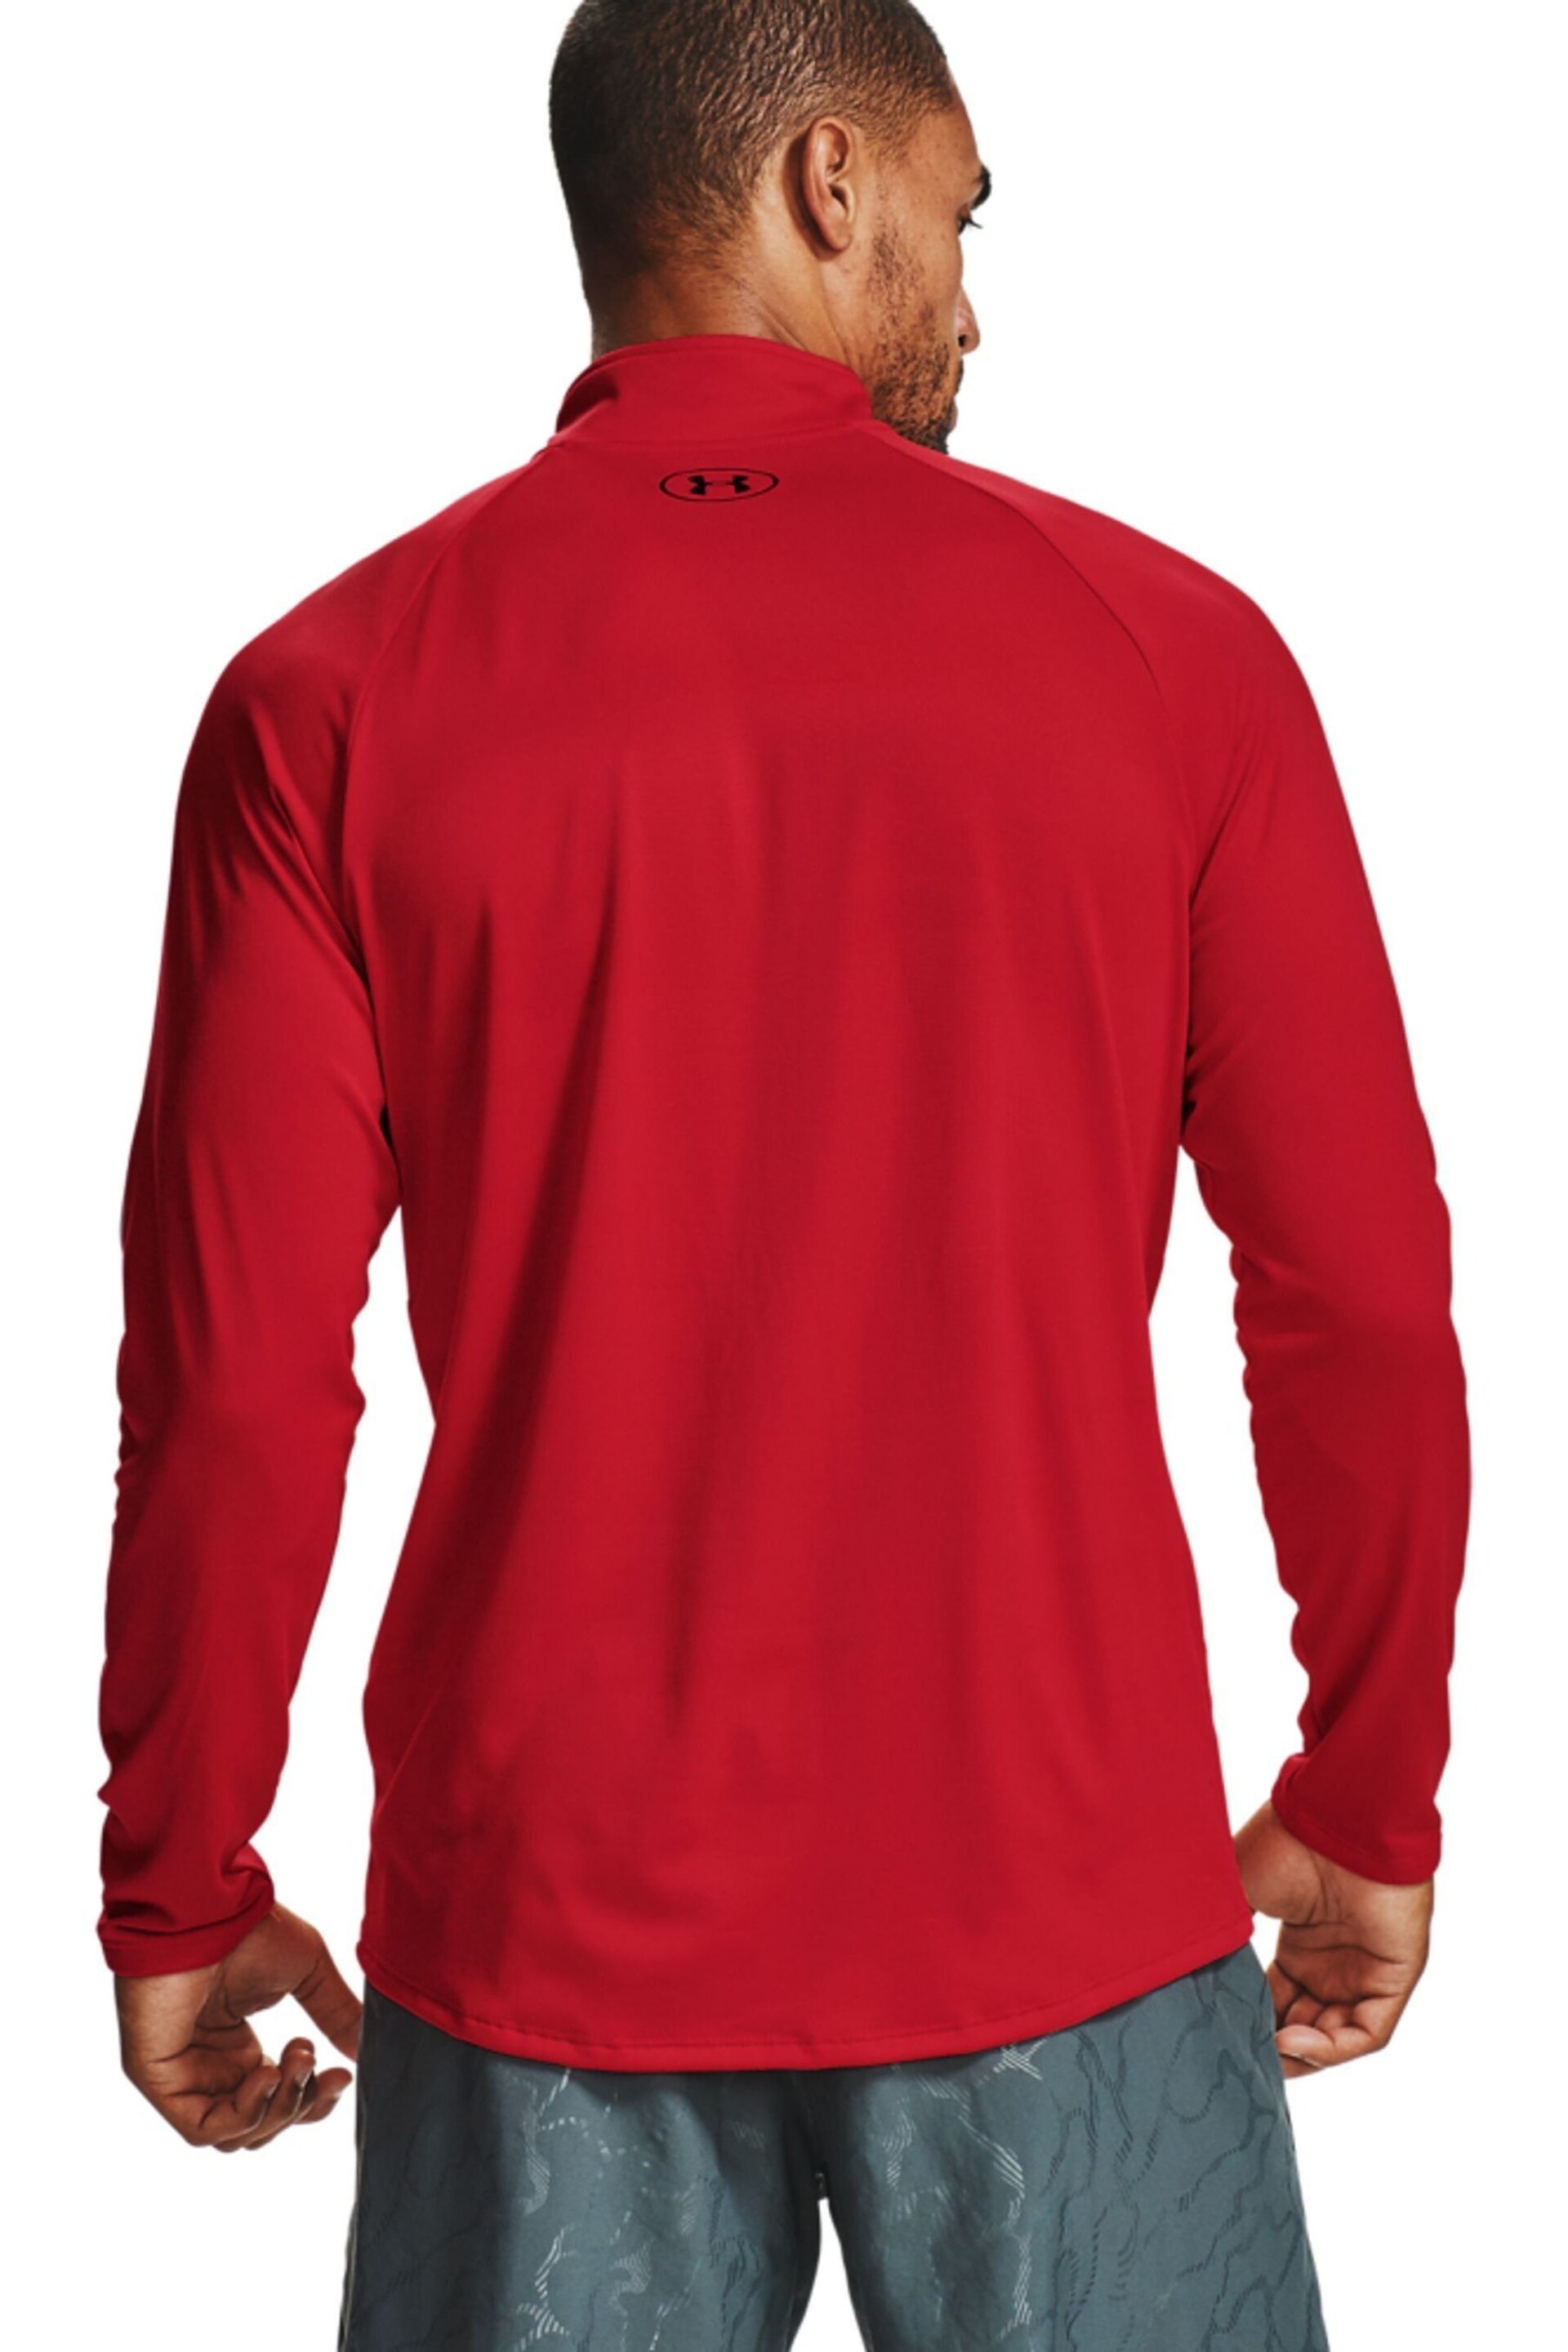 Under Armour Red Under Armour Red Tech 2.0 1/2 Zip Top - Image 2 of 6